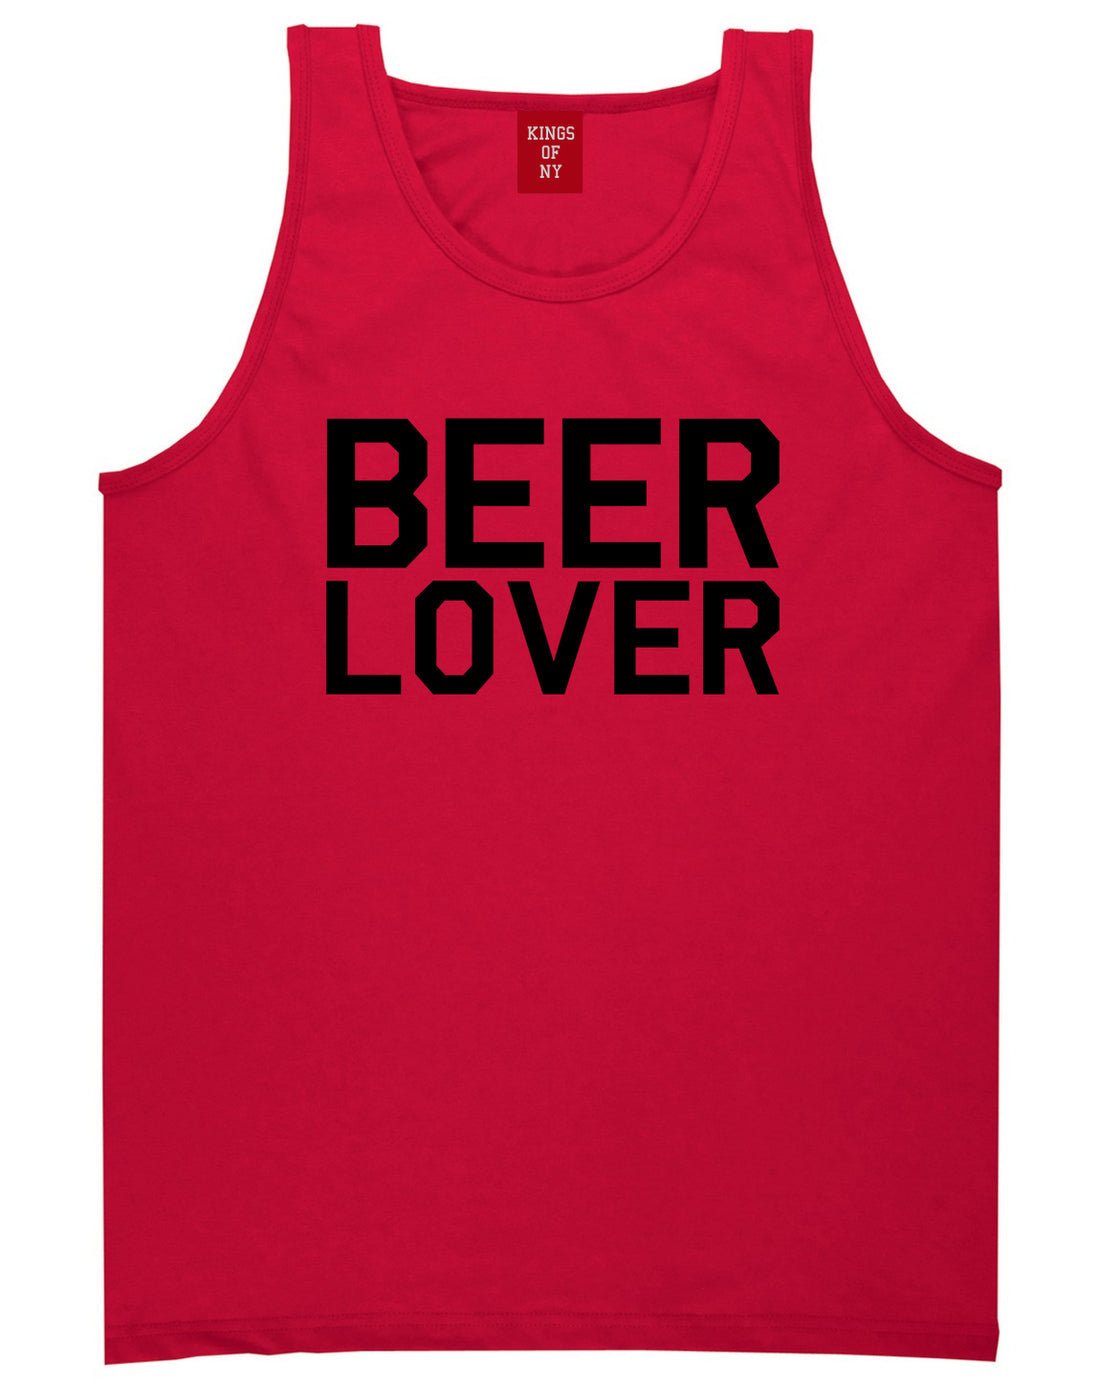 Beer_Lover_Drinking Mens Red Tank Top Shirt by Kings Of NY